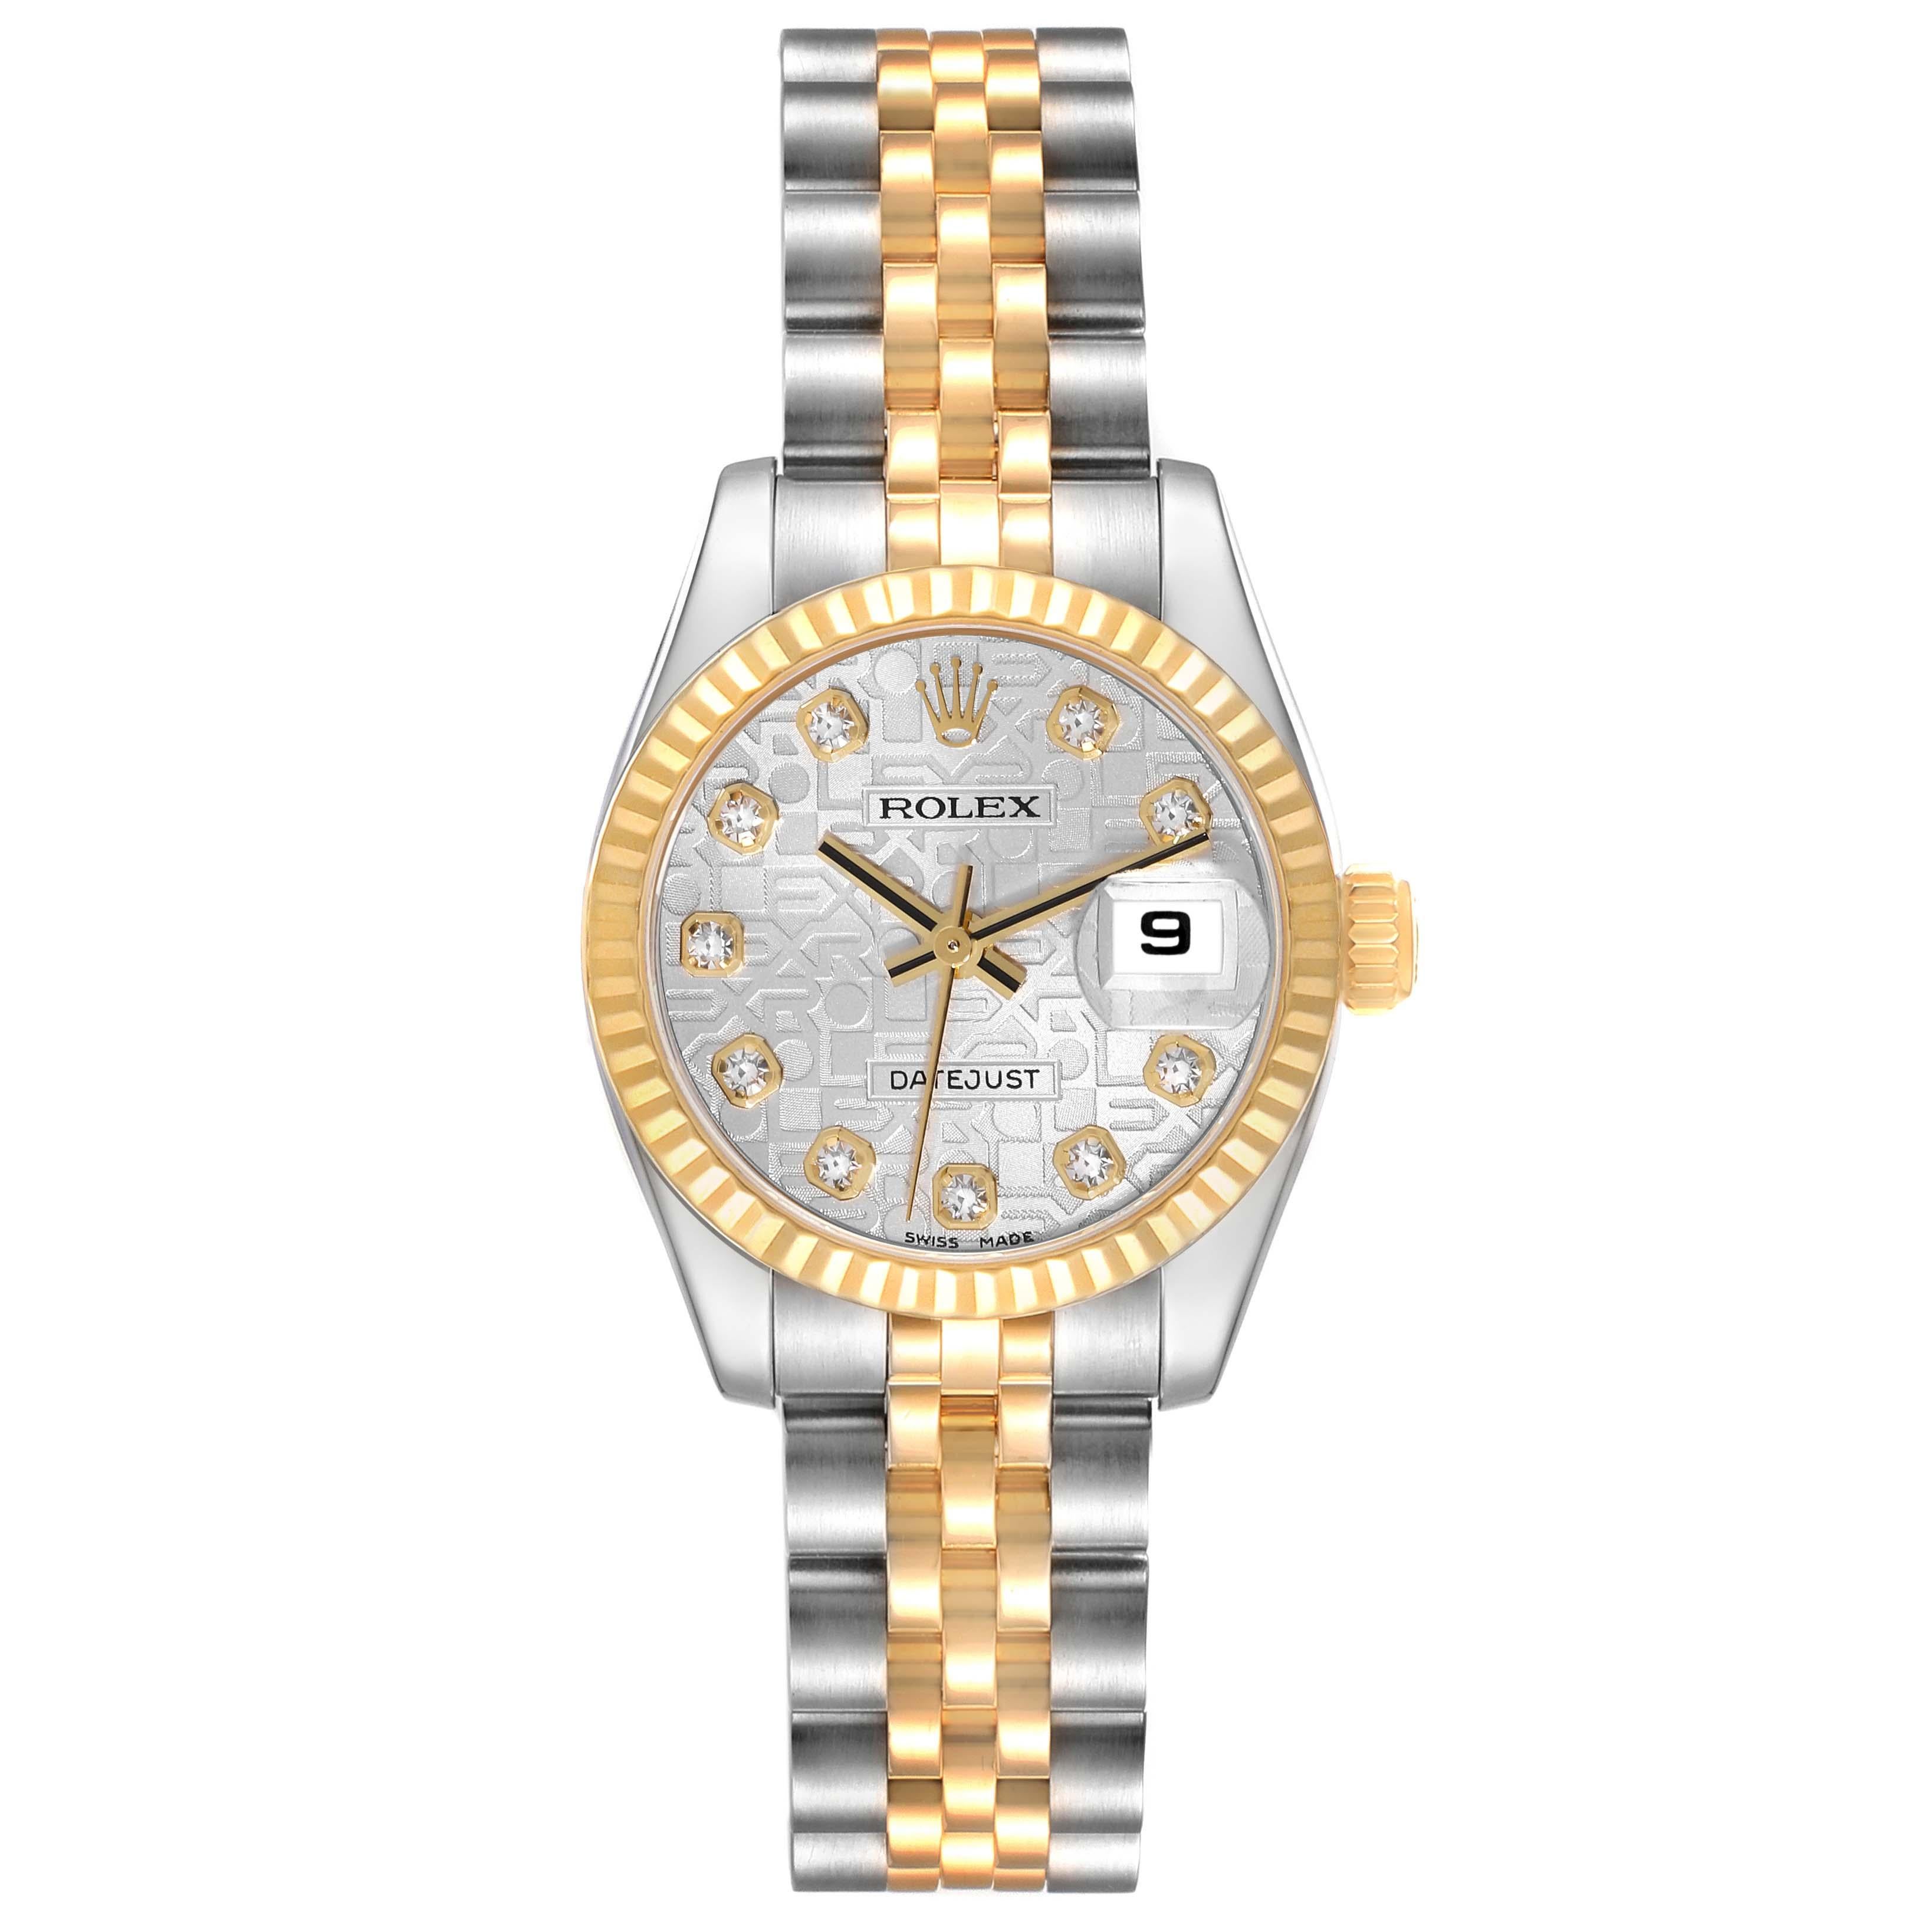 Rolex Datejust Steel Yellow Gold Anniversary Diamond Dial Ladies Watch 179173. Officially certified chronometer self-winding movement. Stainless steel oyster case 26 mm in diameter. Rolex logo on an 18K yellow gold crown. 18k yellow gold fluted